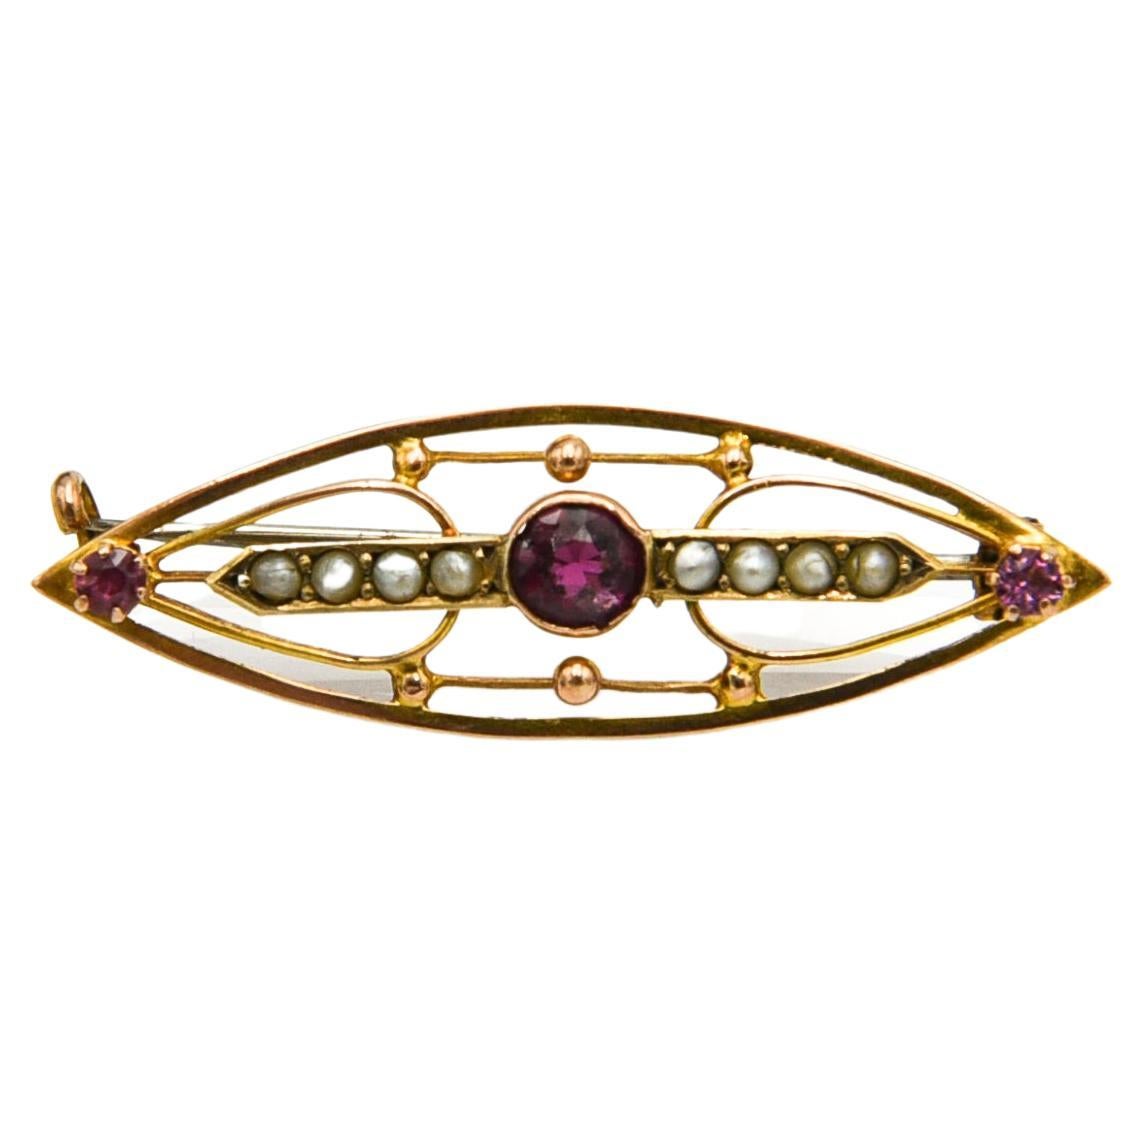 Old gold brooch with tourmalines and pearls For Sale